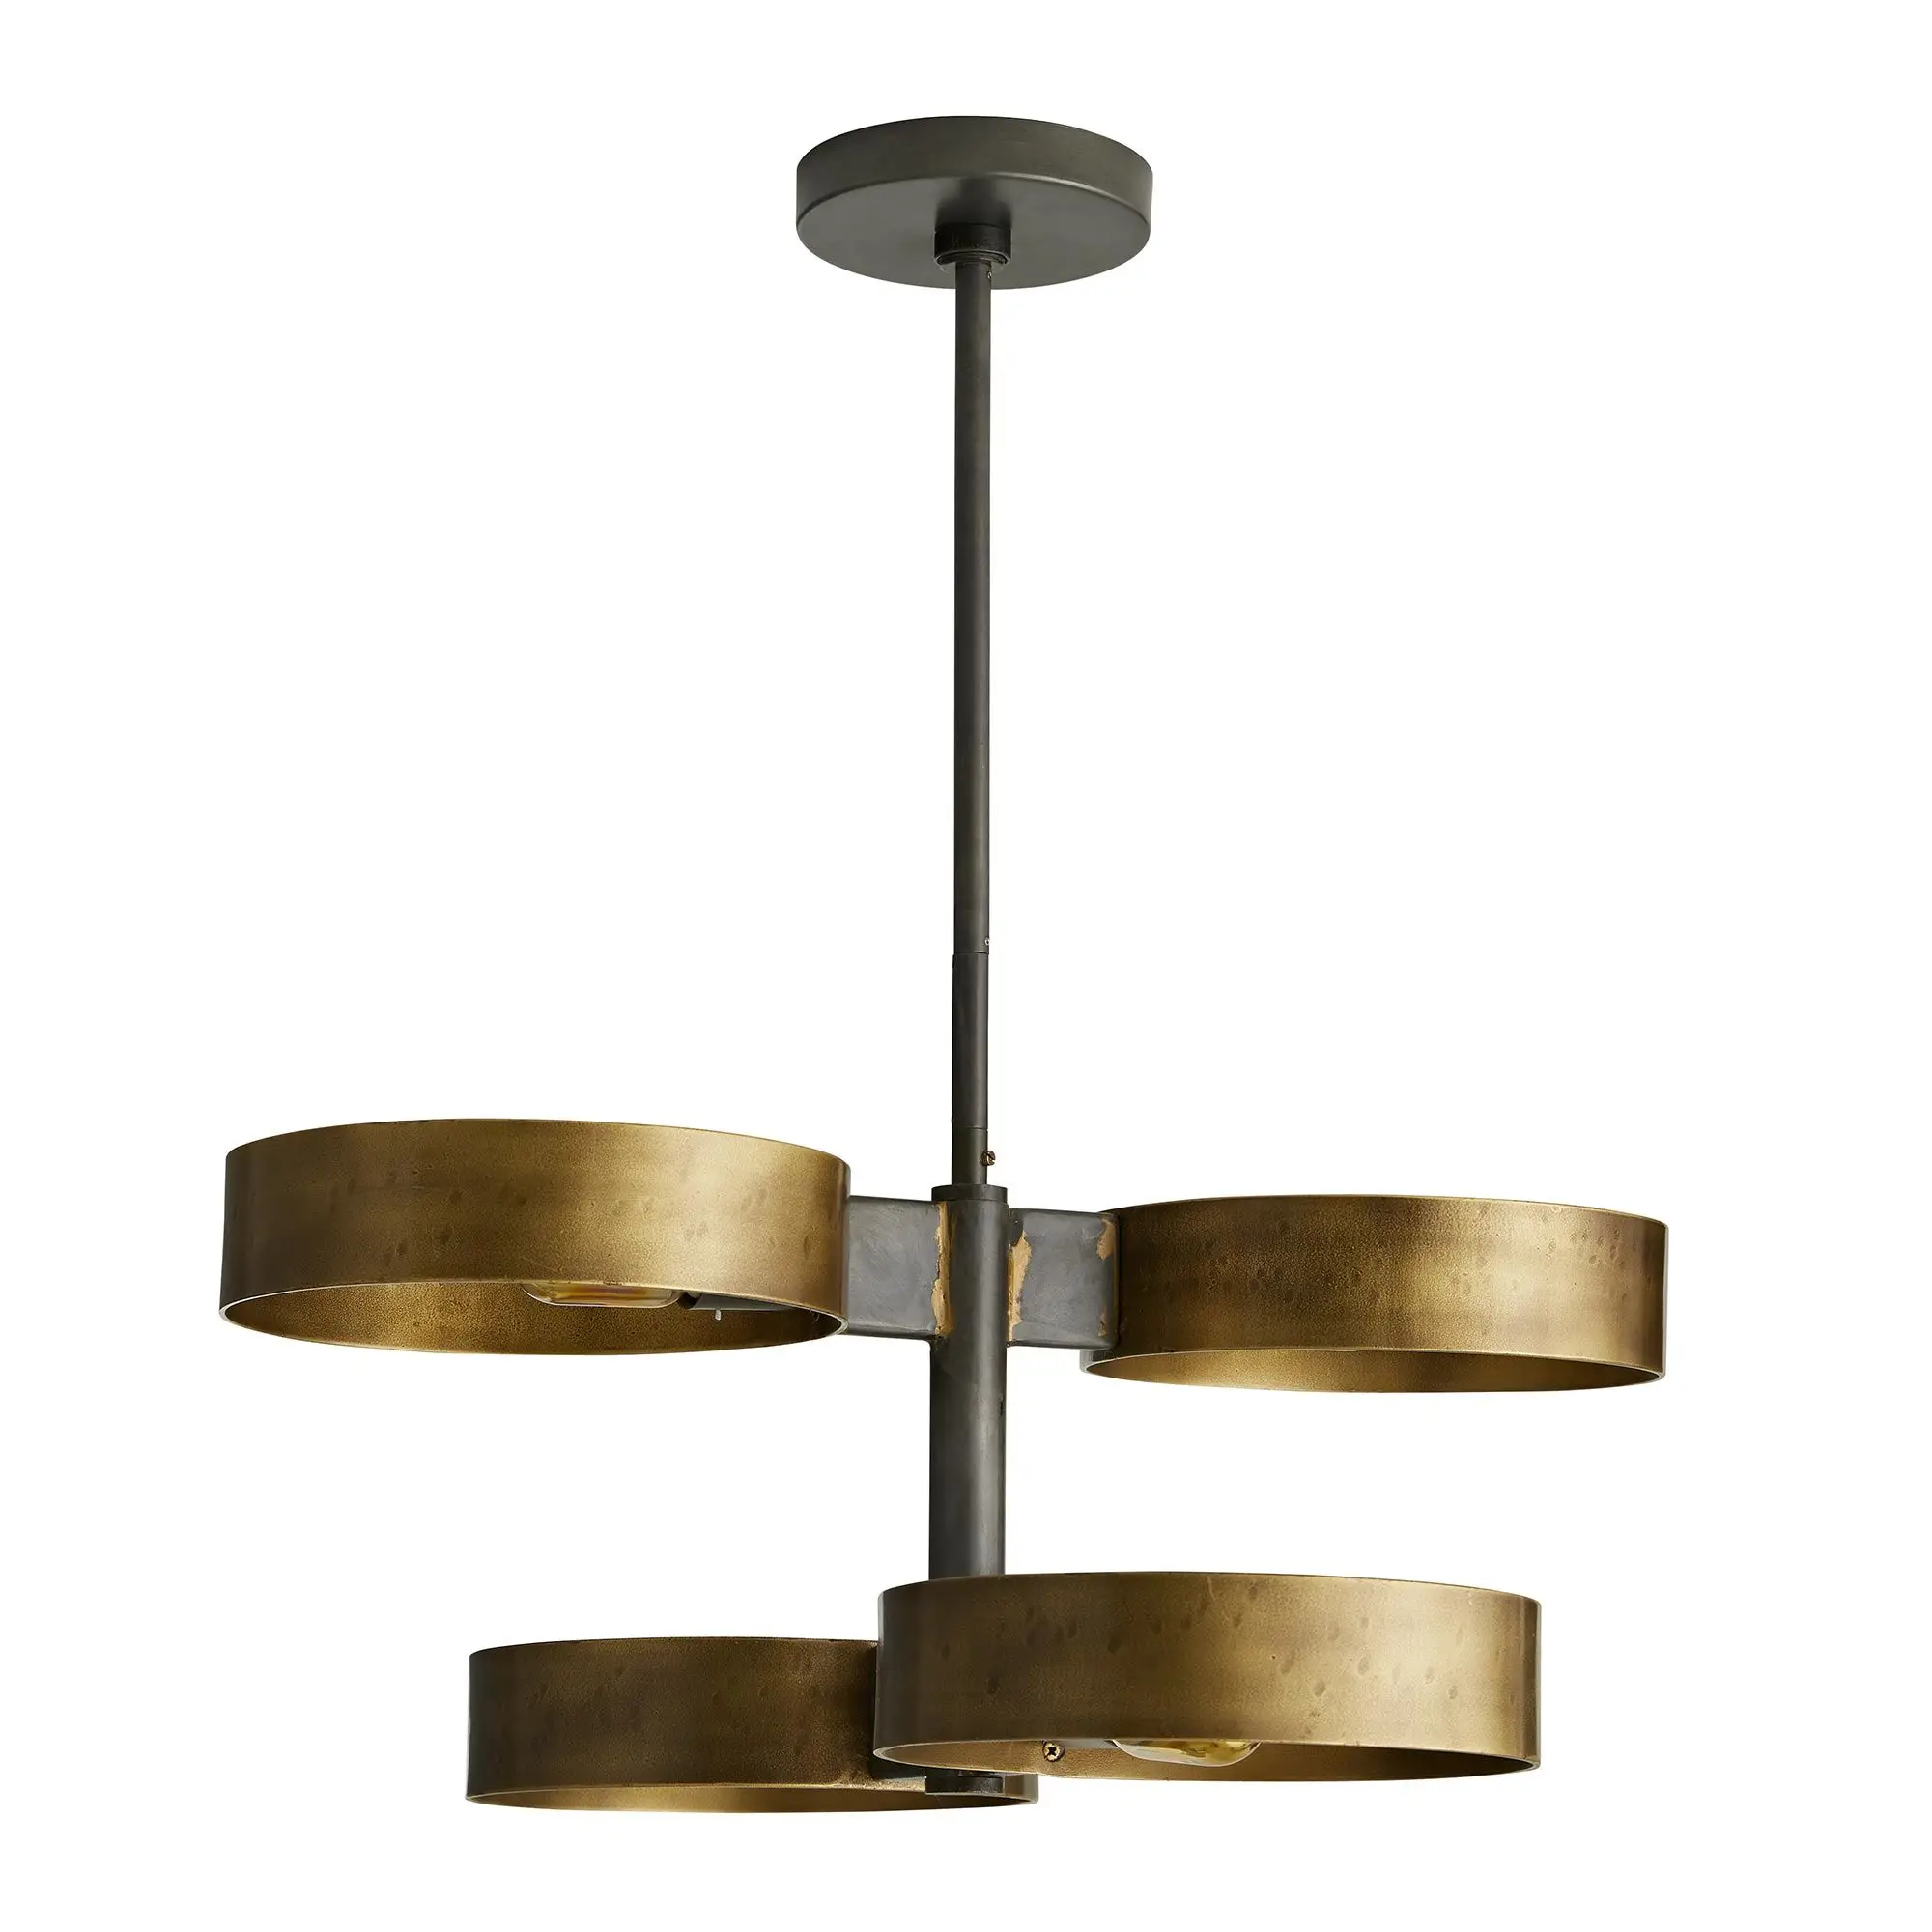 ROCCO chandelier by Arteriors